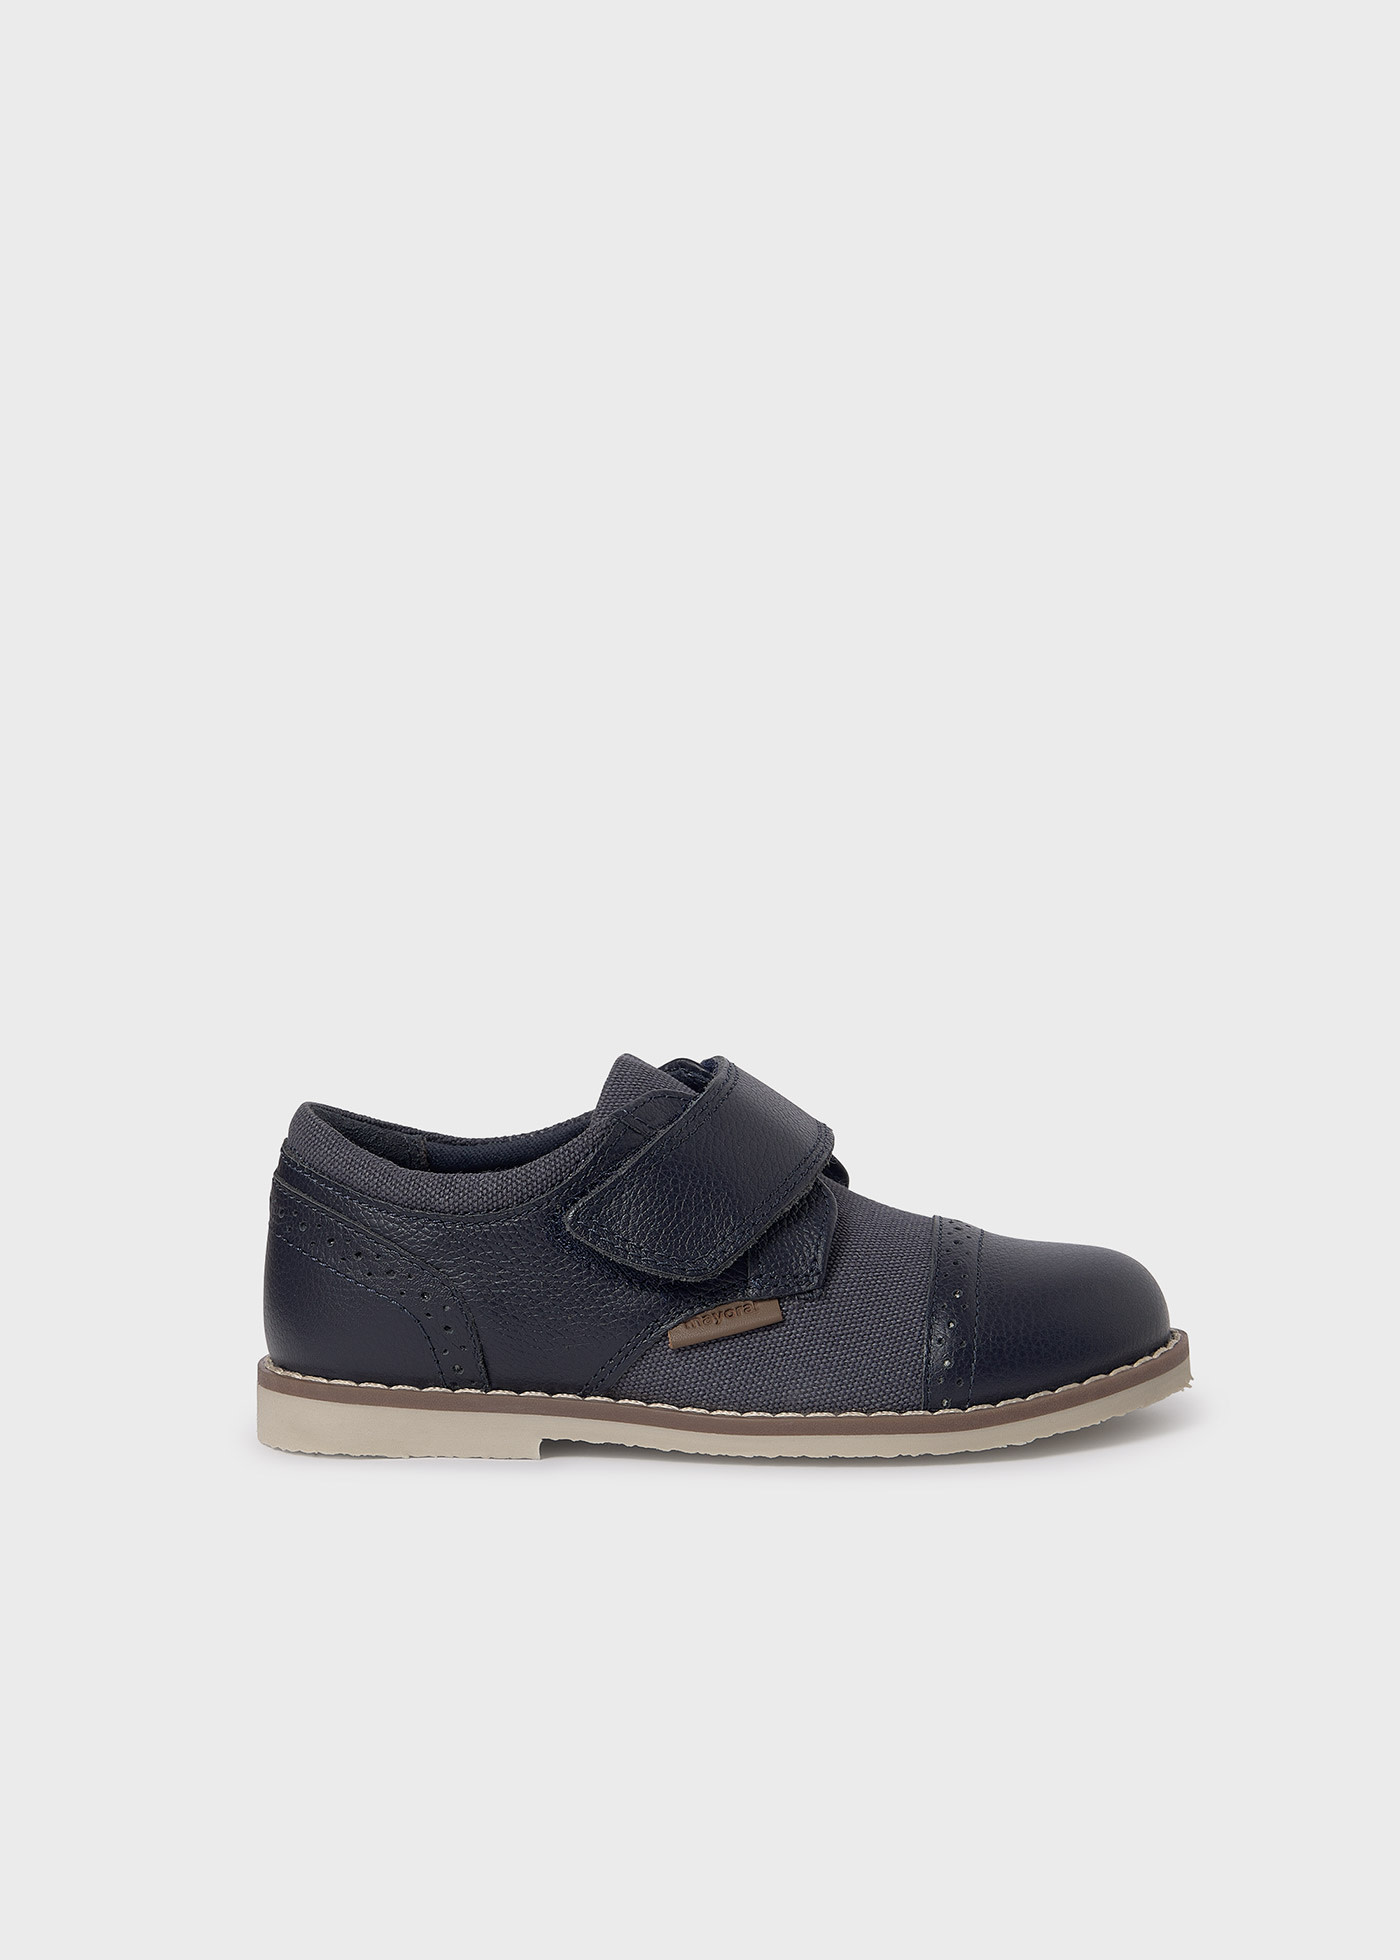 Boy Oxford Combined Shoe Leather